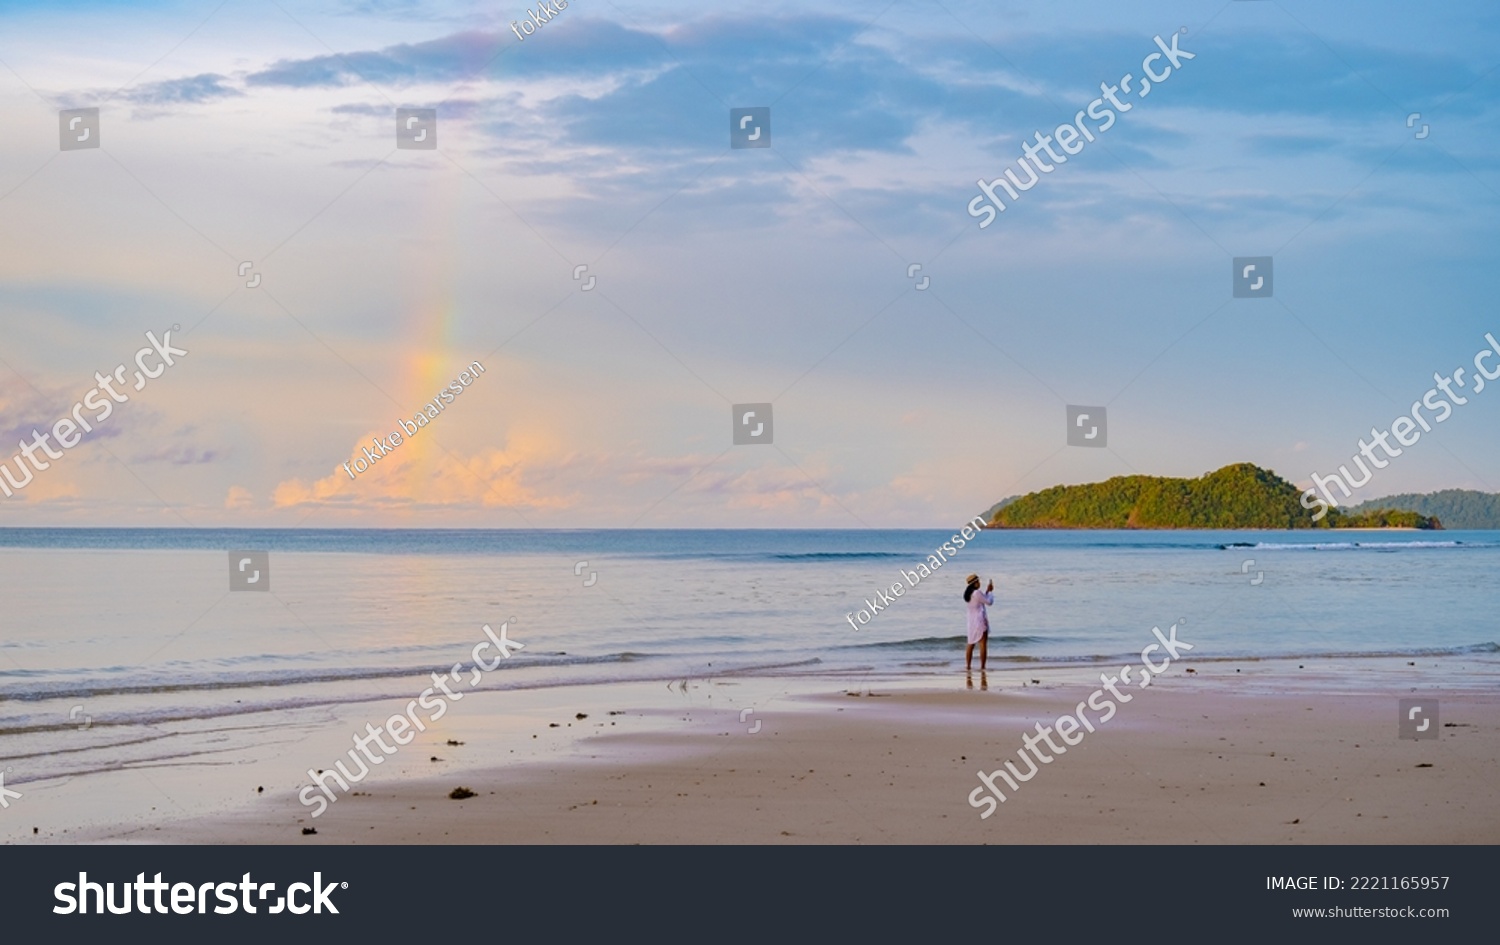 Asian women looking at a rainbow on the beach after a monsoon rain storm in Thailand.Asian women walking on the beach of Koh Mak during sunrise #2221165957